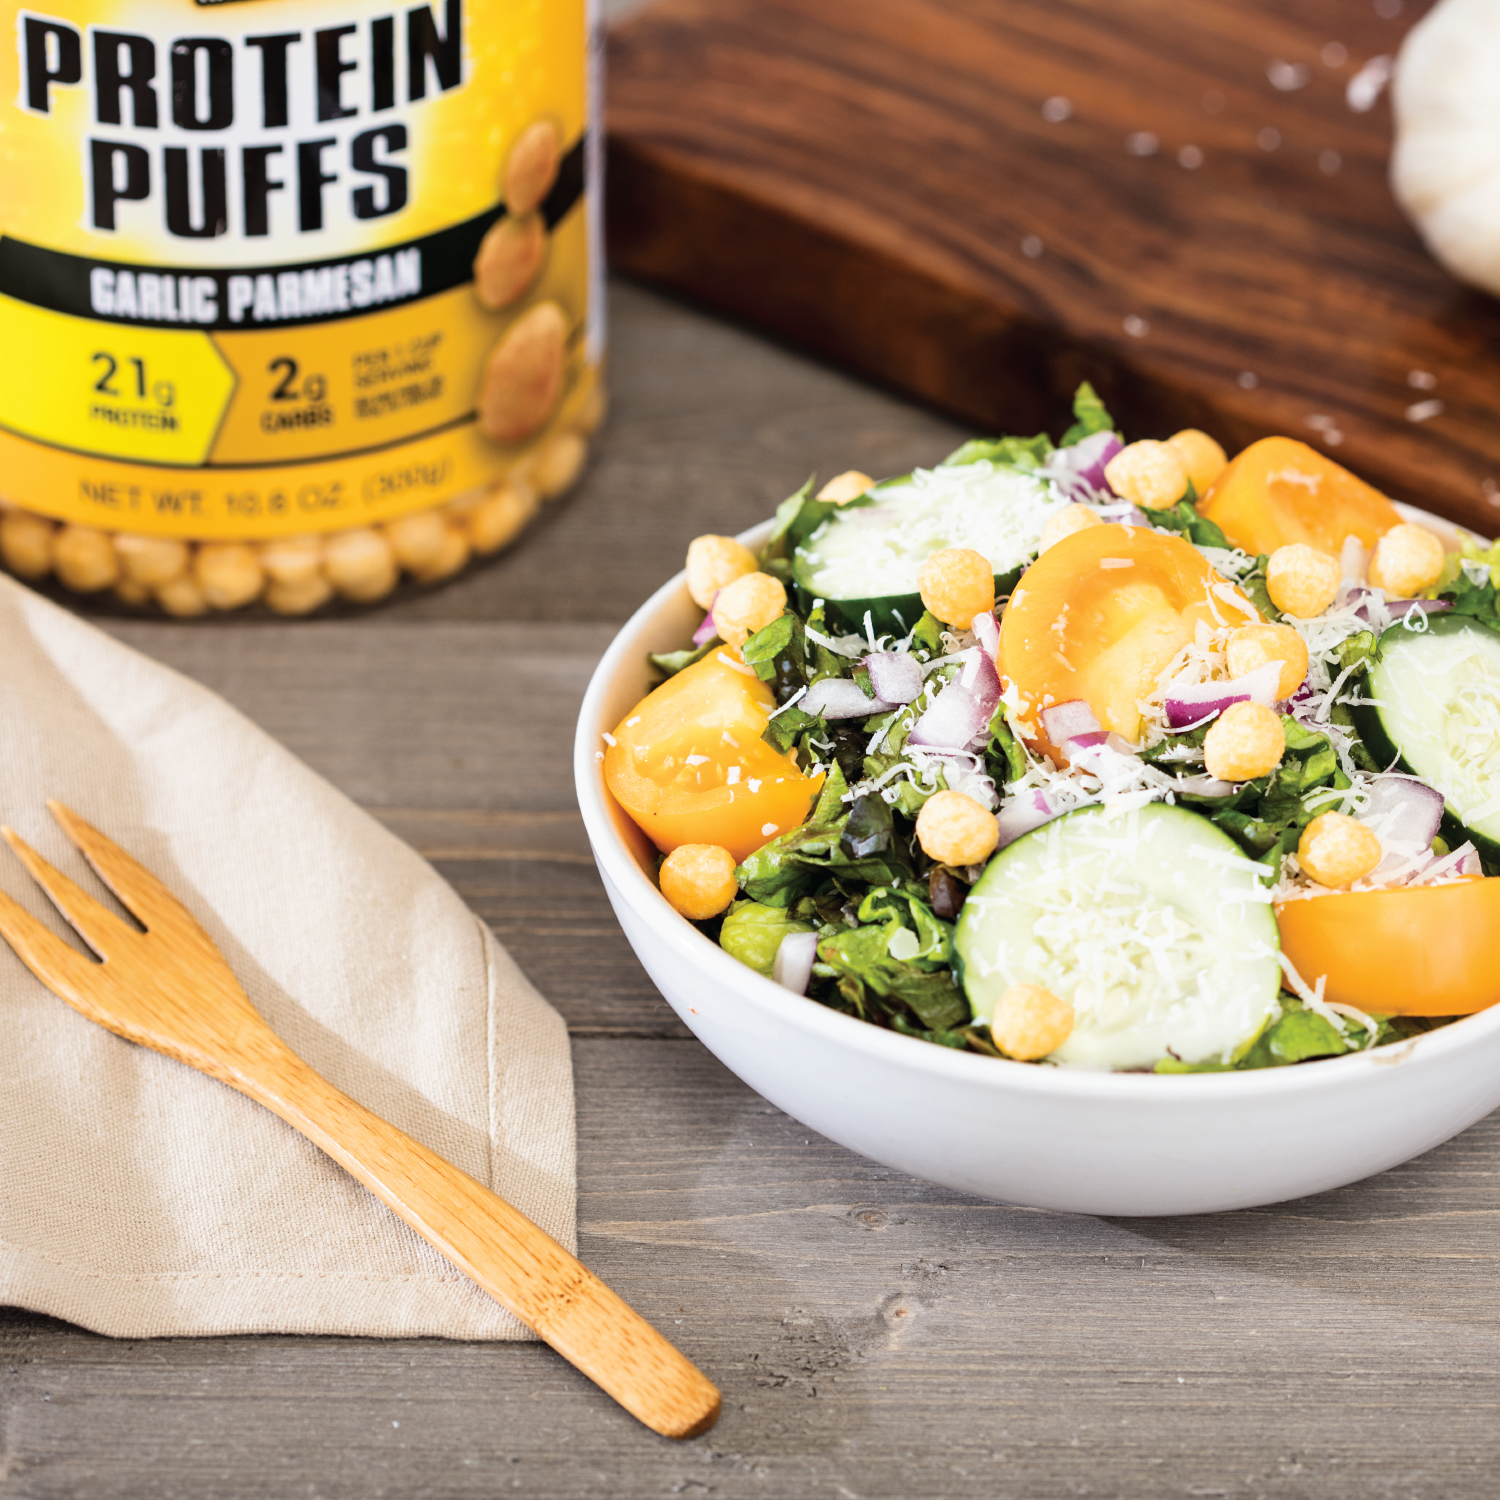 Garlic Parmesan Protein Puffs in a Salad Bowl as a Topping